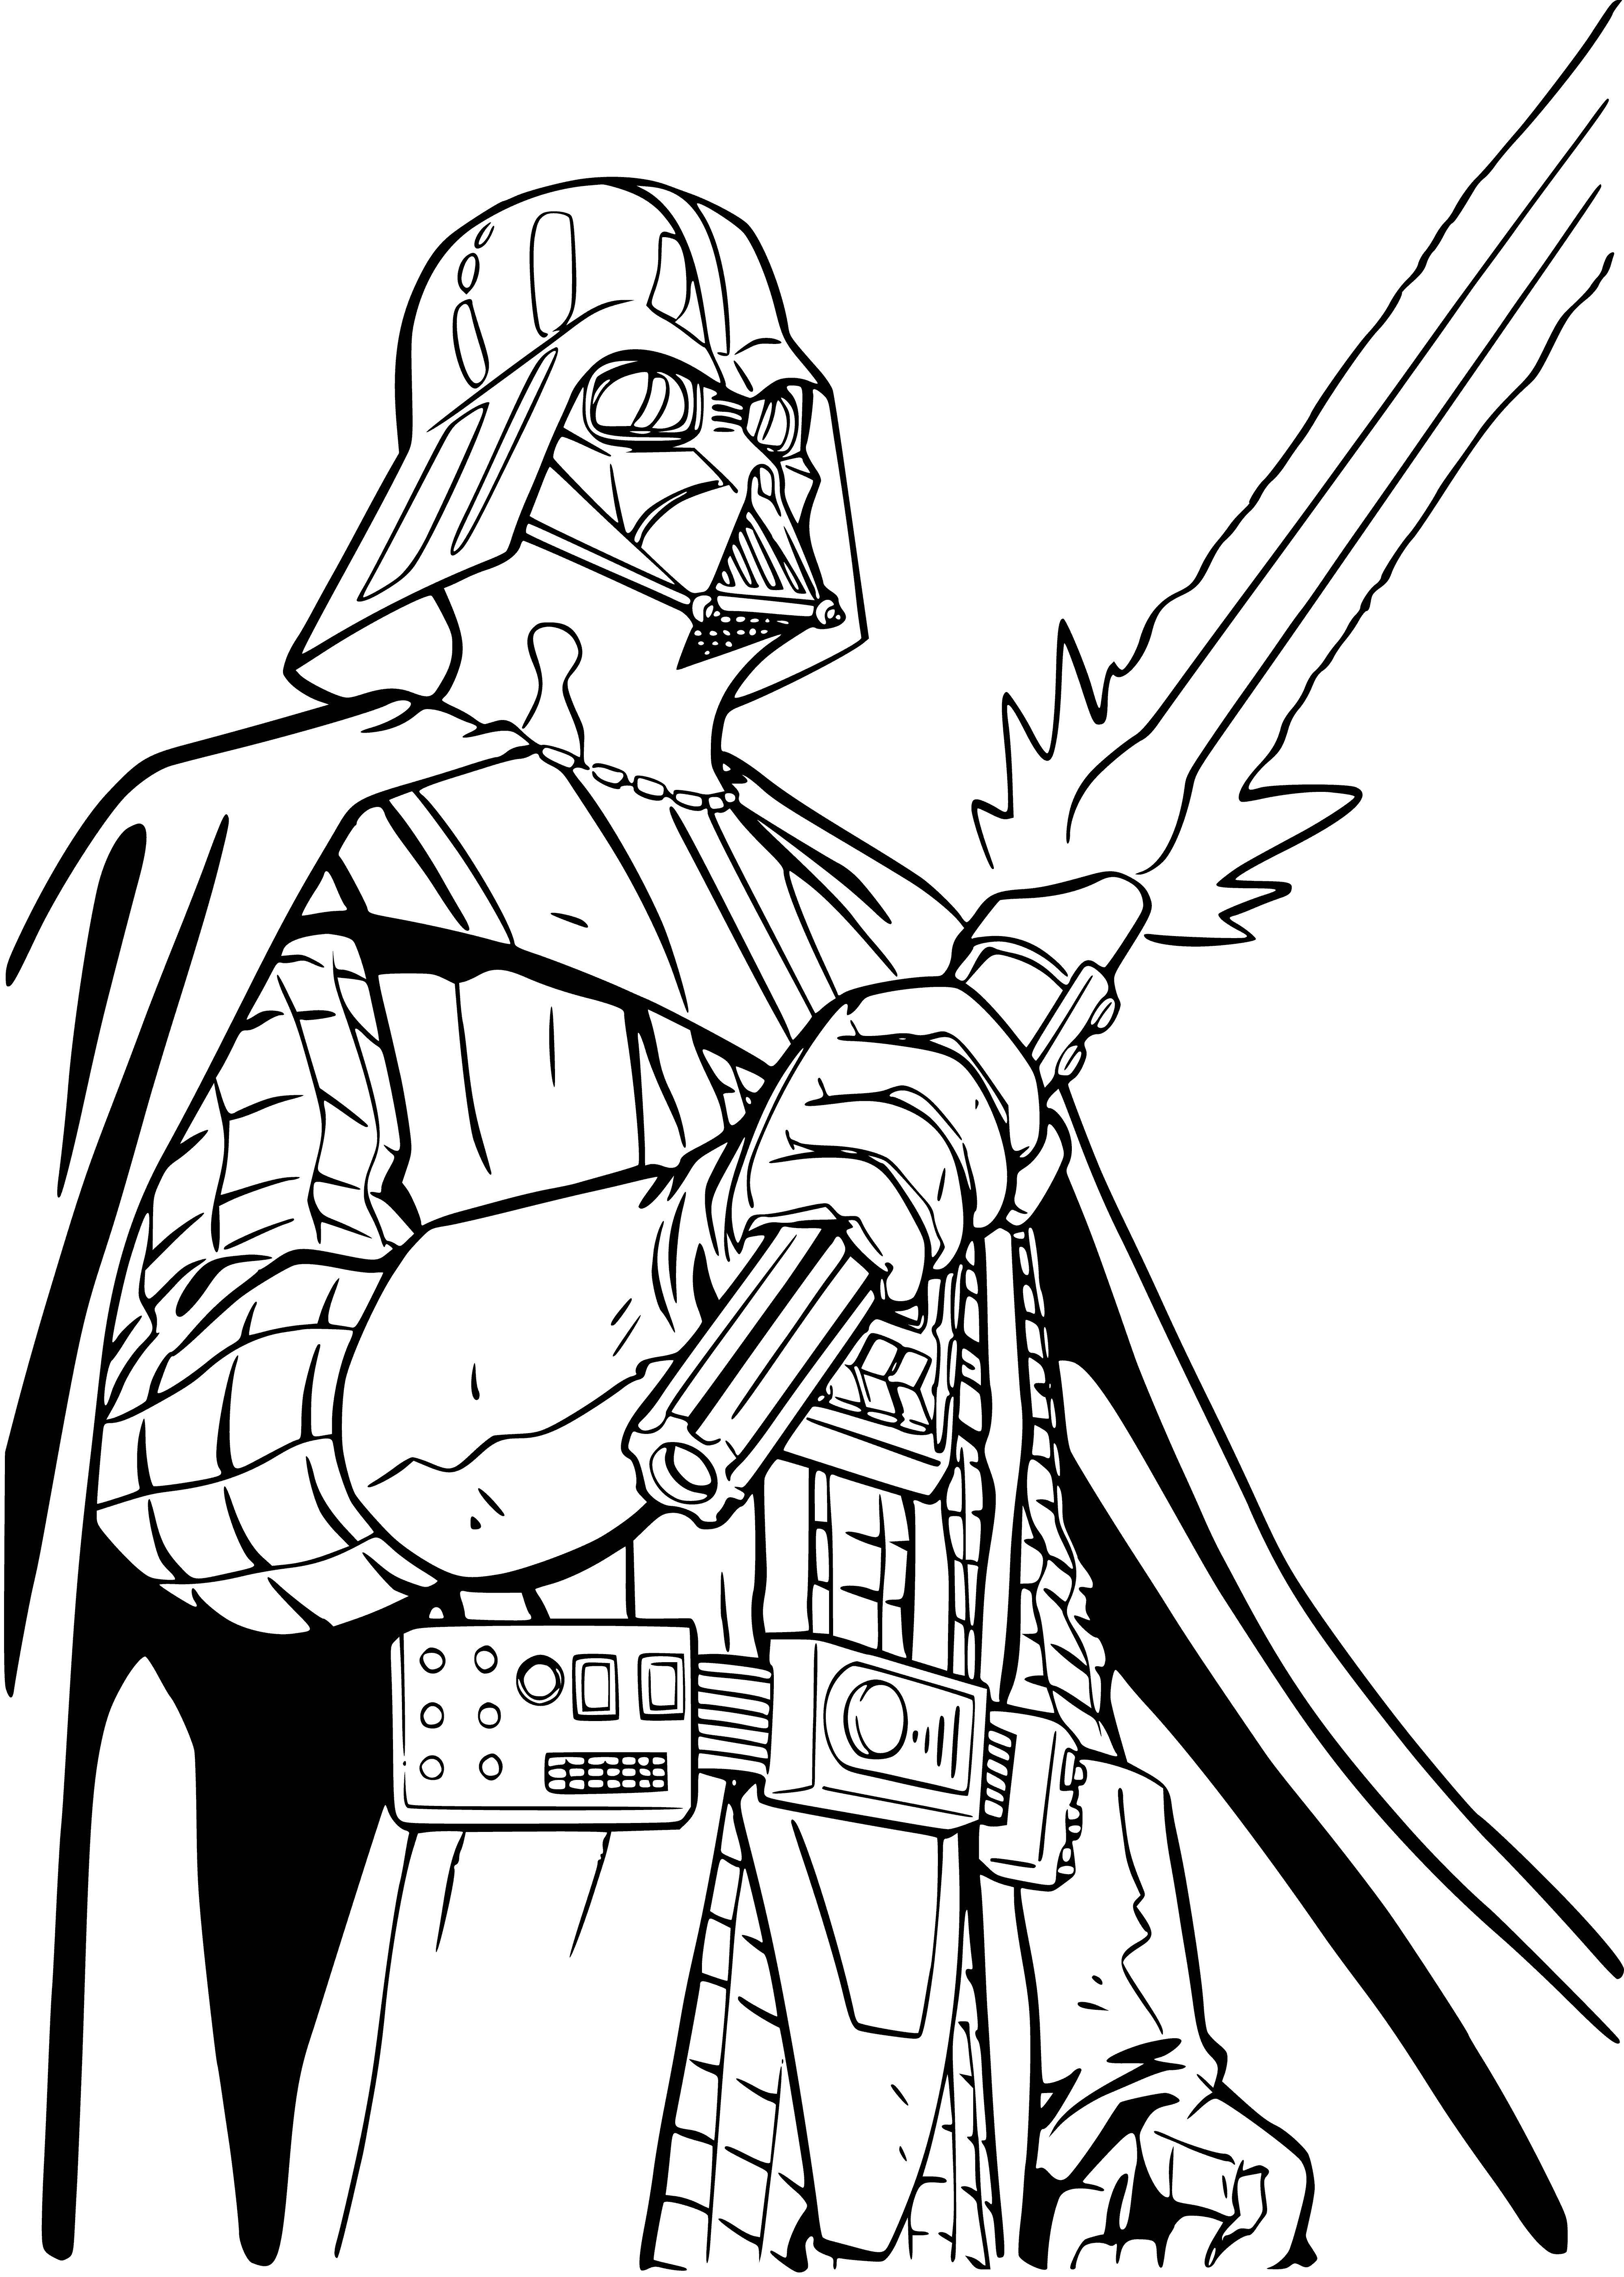 coloring page: Darth Vader, flanked by stormtroopers, commands fear in the Emperor's Palace on Coruscant. His black mask and lightsaber intimidate all who observe him.